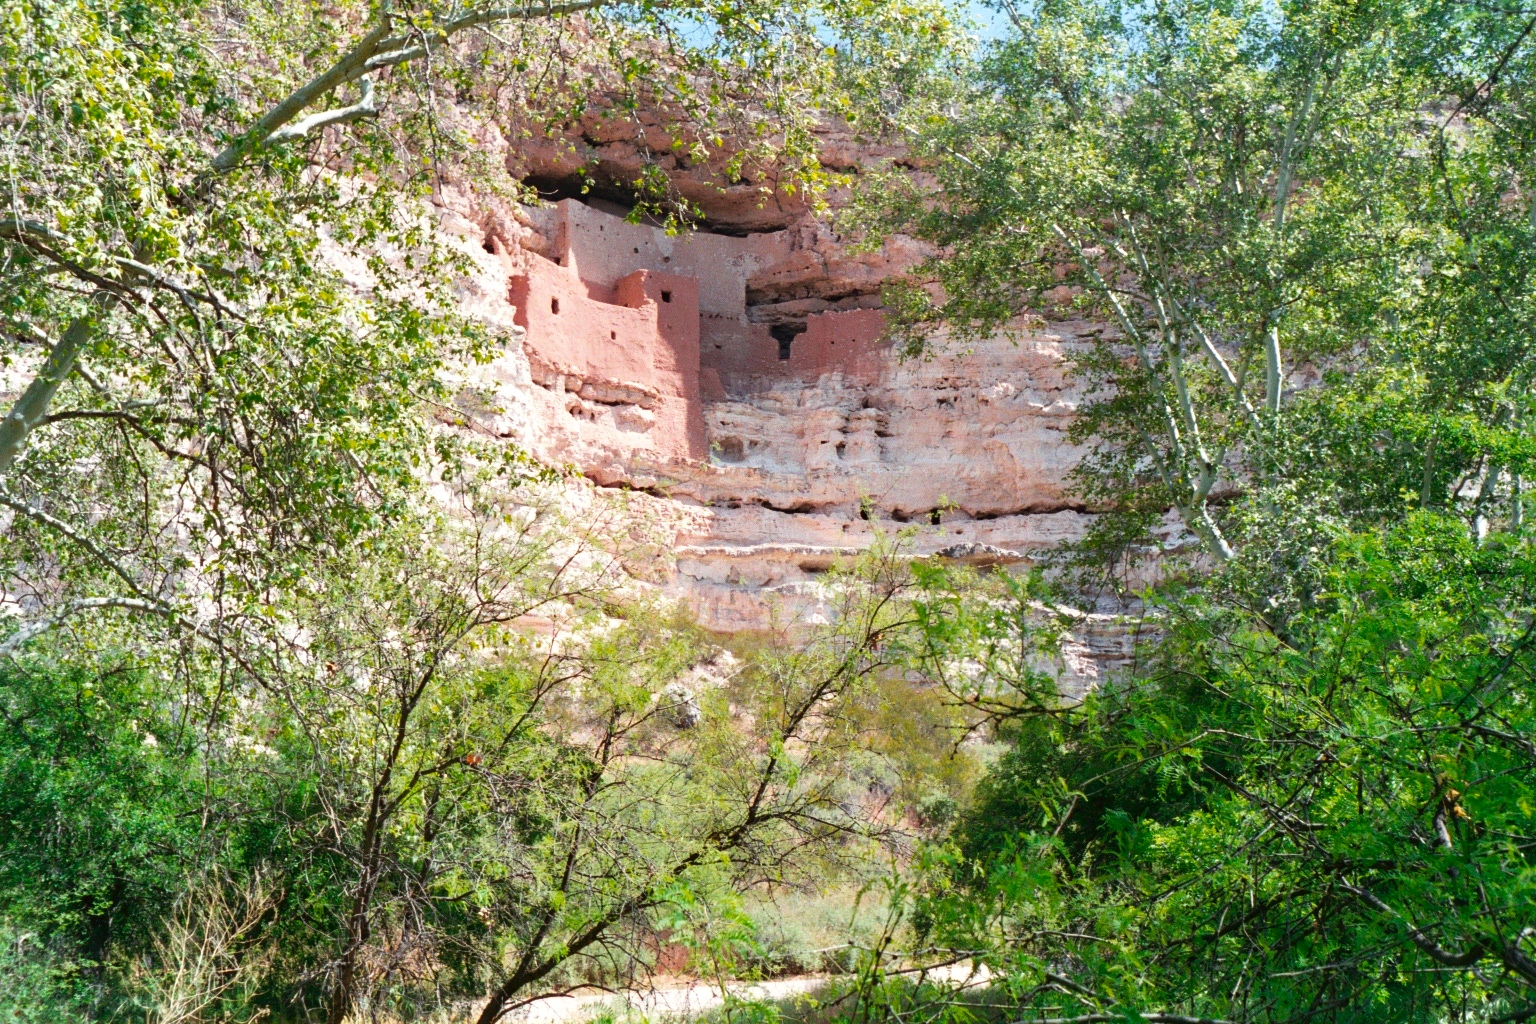 Tiny dwellings that form Montezuma Castle, built into the rock face in Arizona.